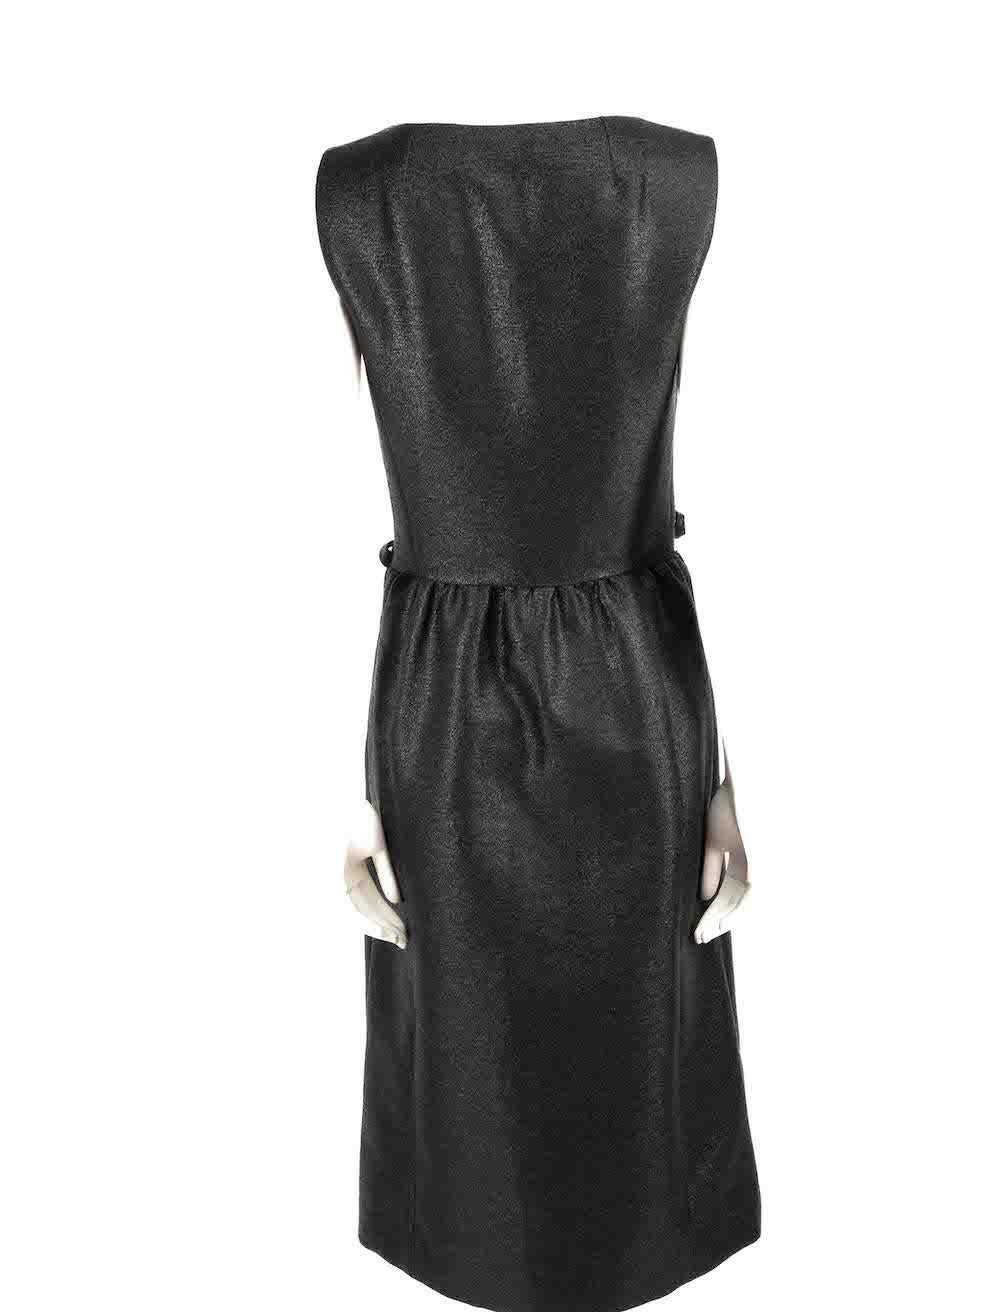 Marc Jacobs Black Glitter Accent Belted Dress Size L In Good Condition For Sale In London, GB